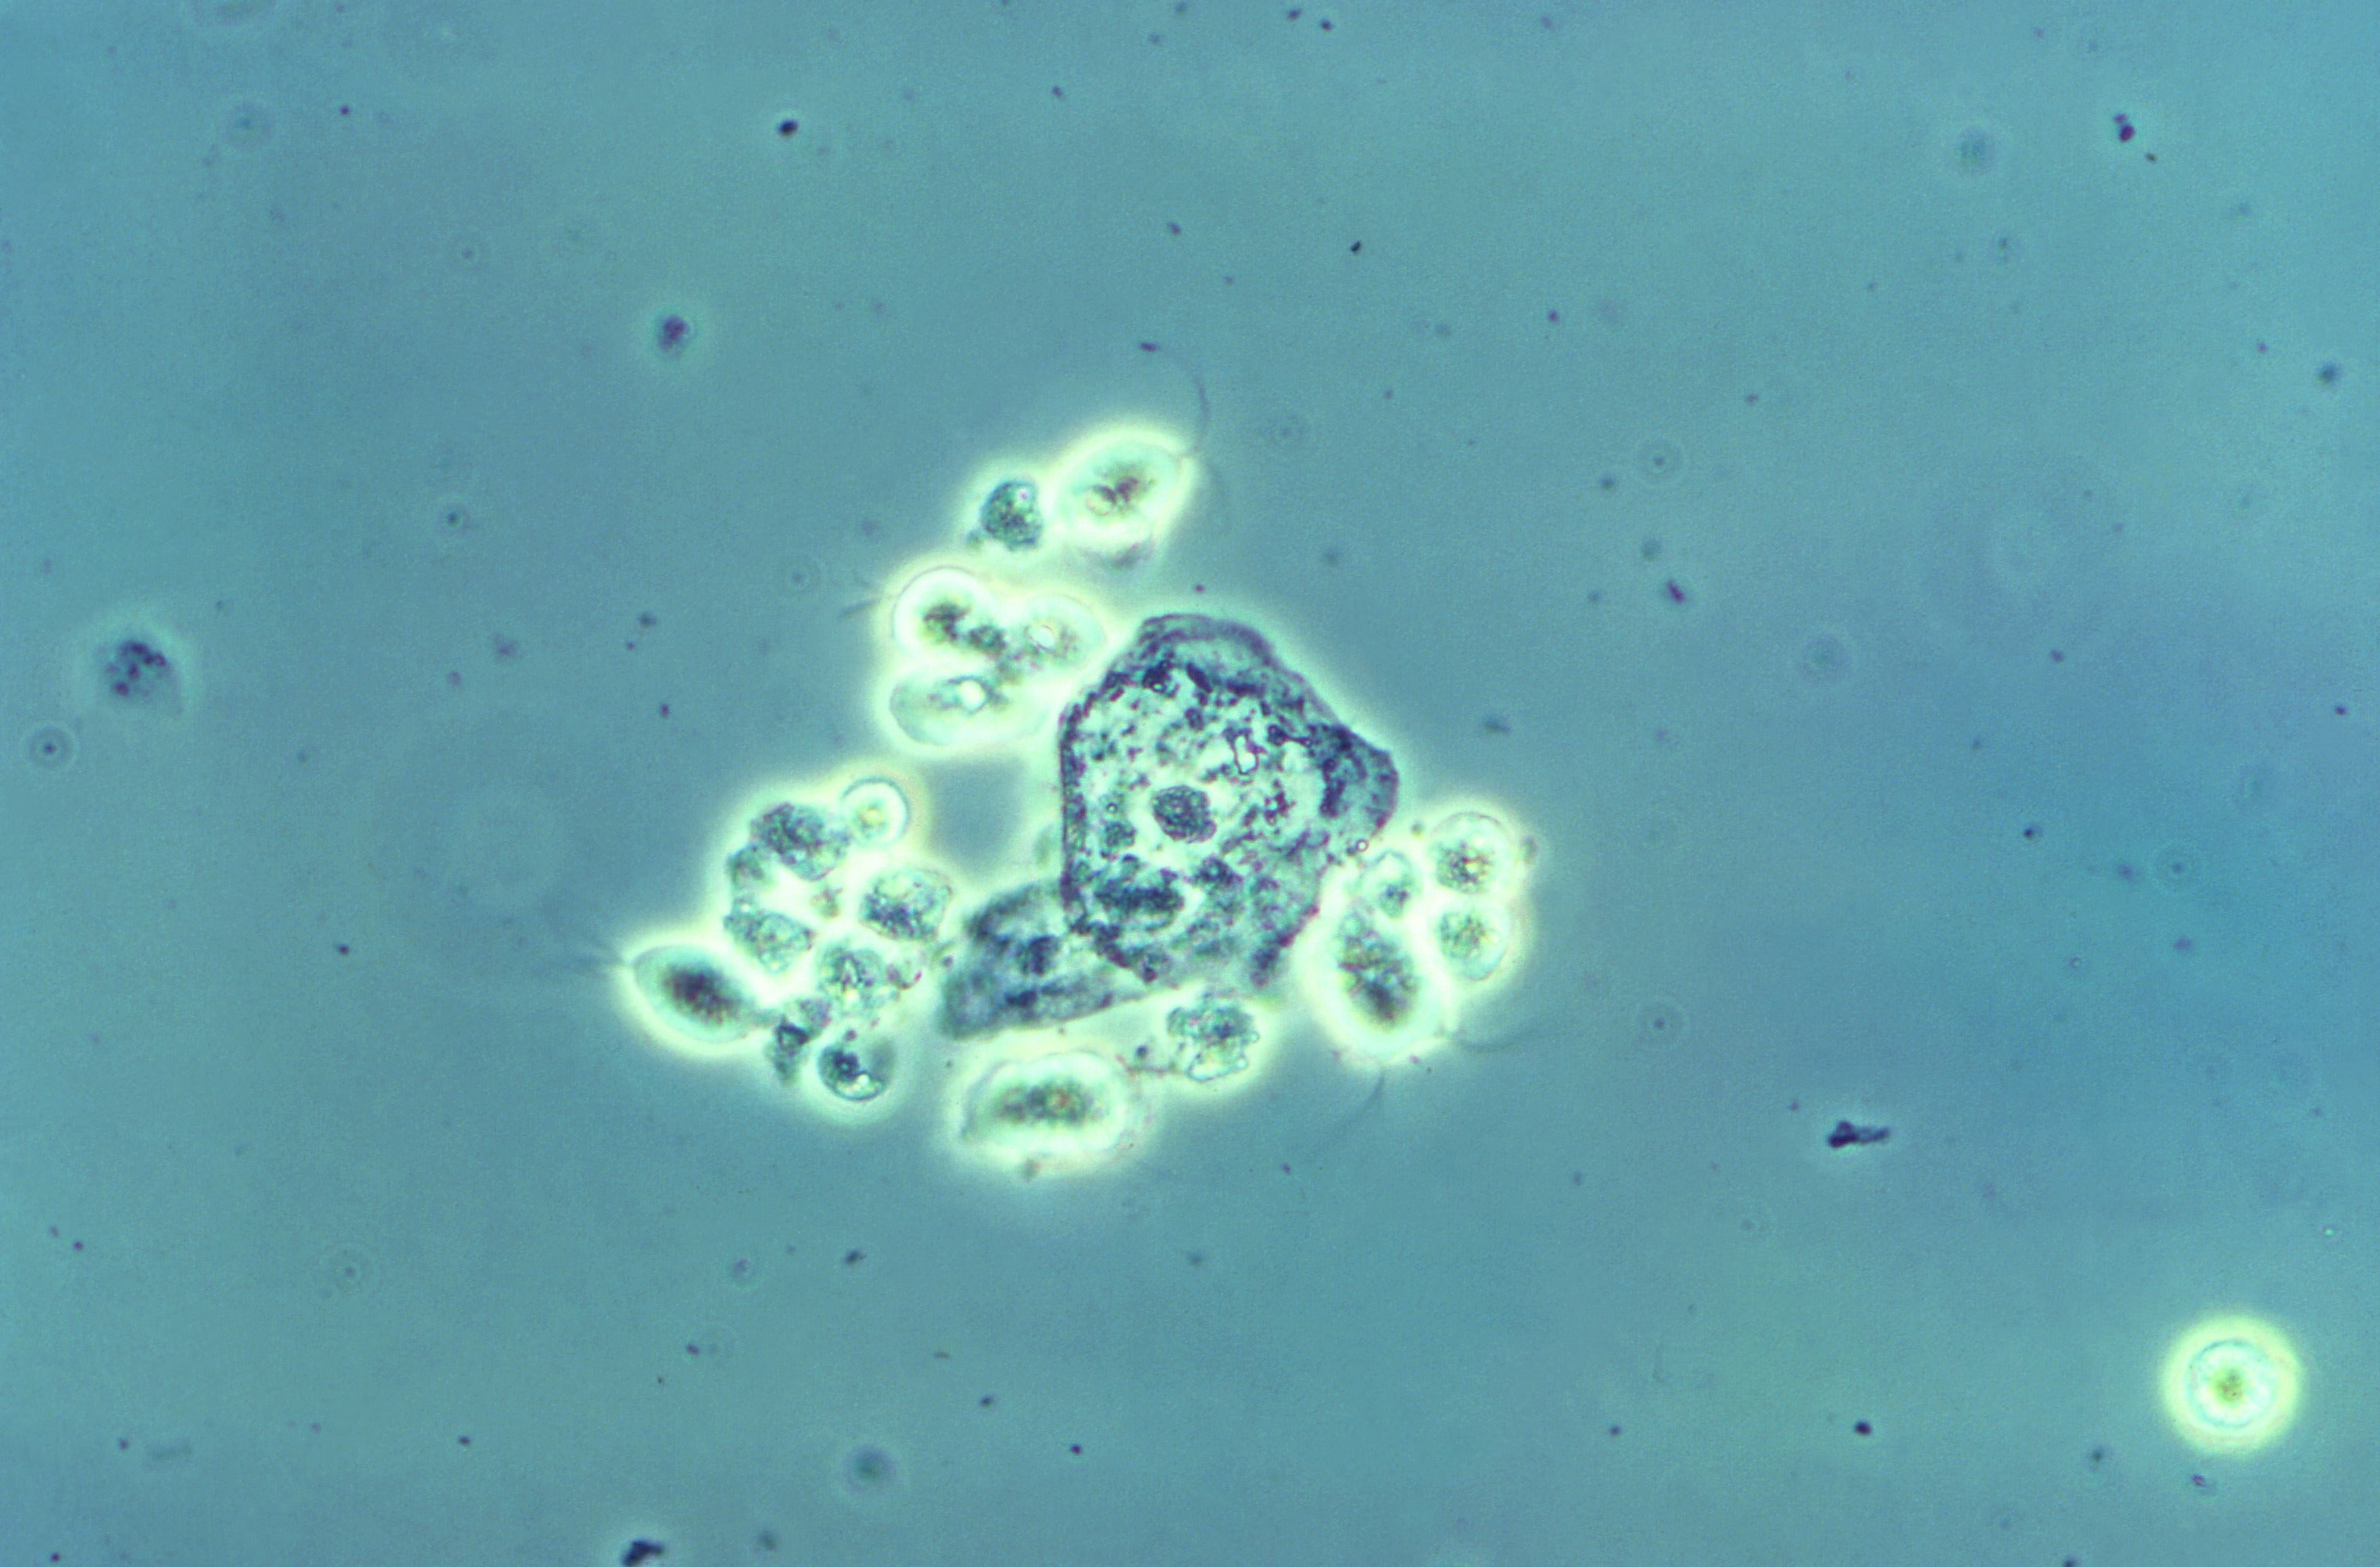 A group of Trichomonas vaginalis parasitic protozoa, collected from vaginal discharge. (Image: CDC/Joe Miller)